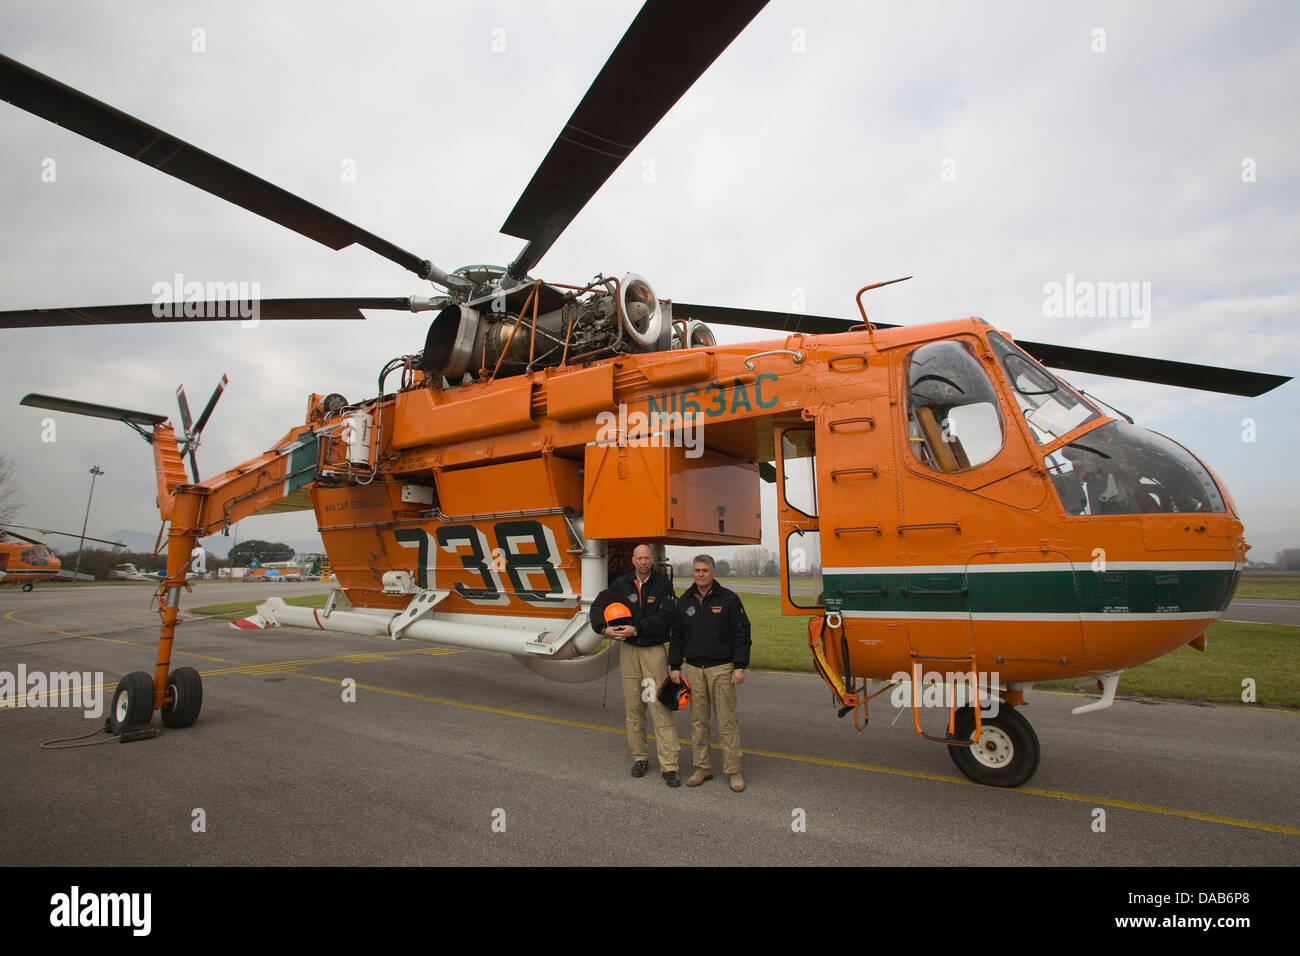 Europe, Italy, Tuscany, Lucca, Tassignano airport, helicopter Erickson air-crane S-64 for air fire-fighting Stock Photo